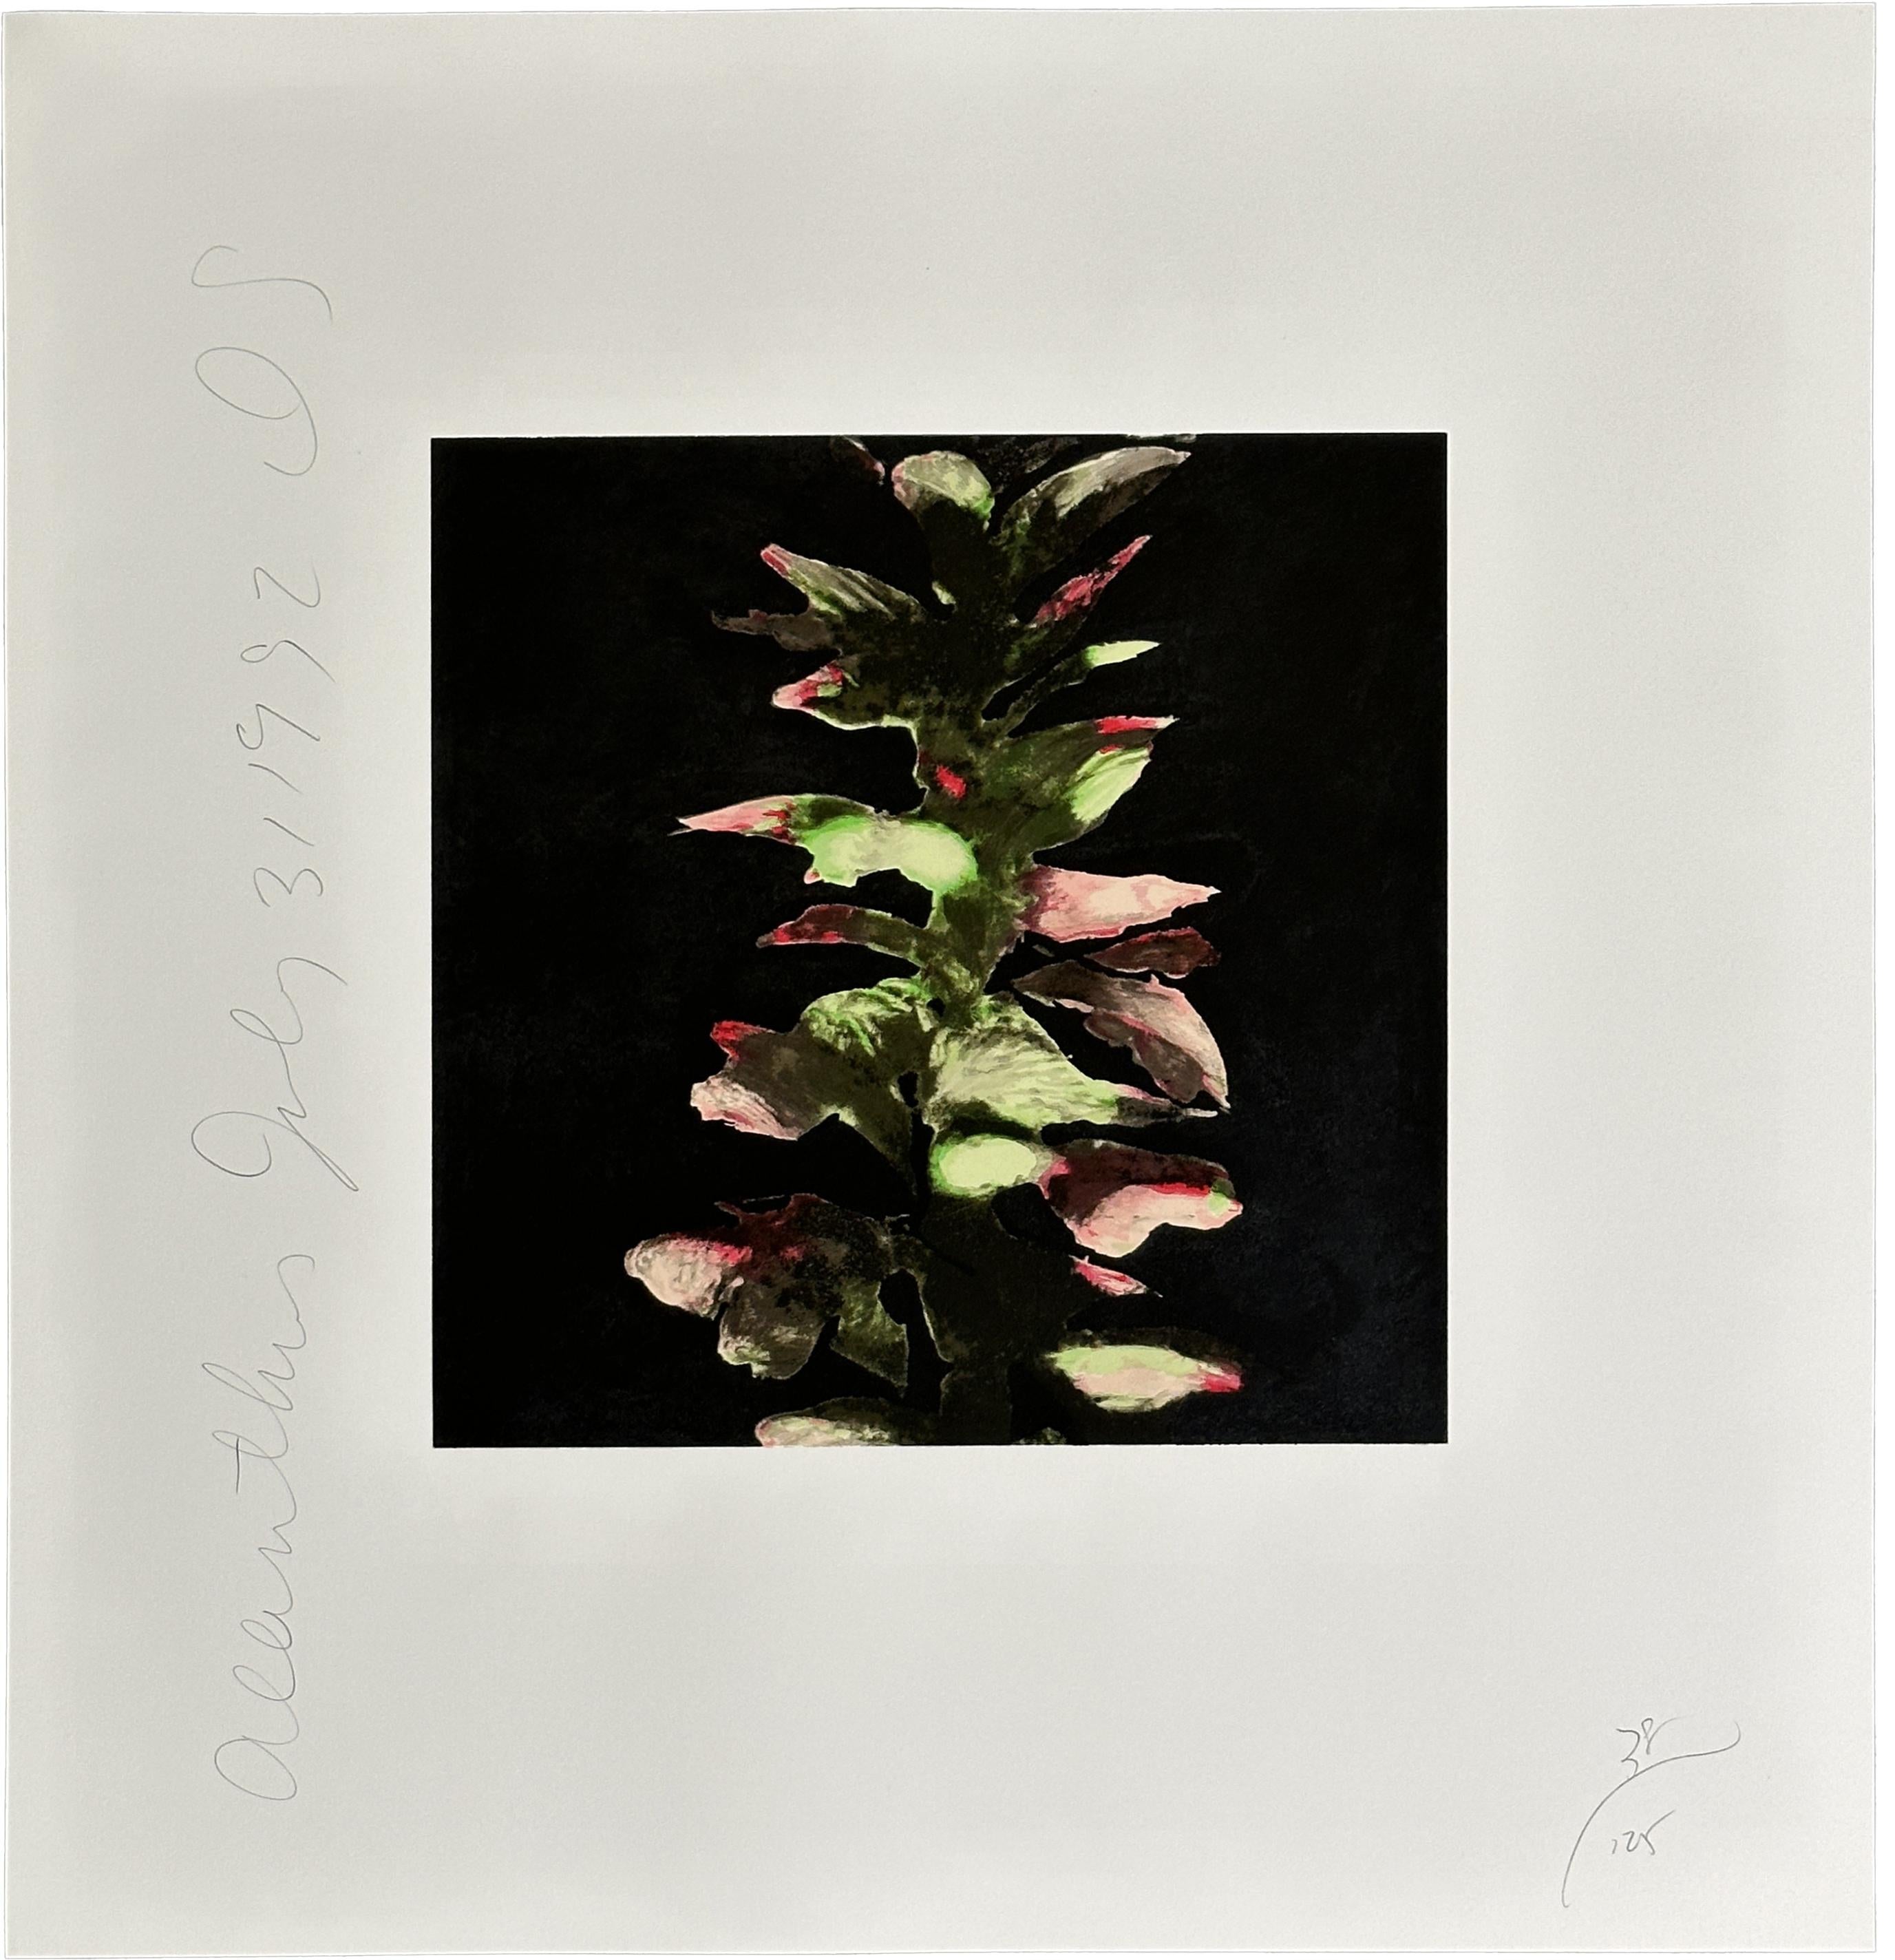  Acanthus 1992 Signed Limited Edition Screen Print 